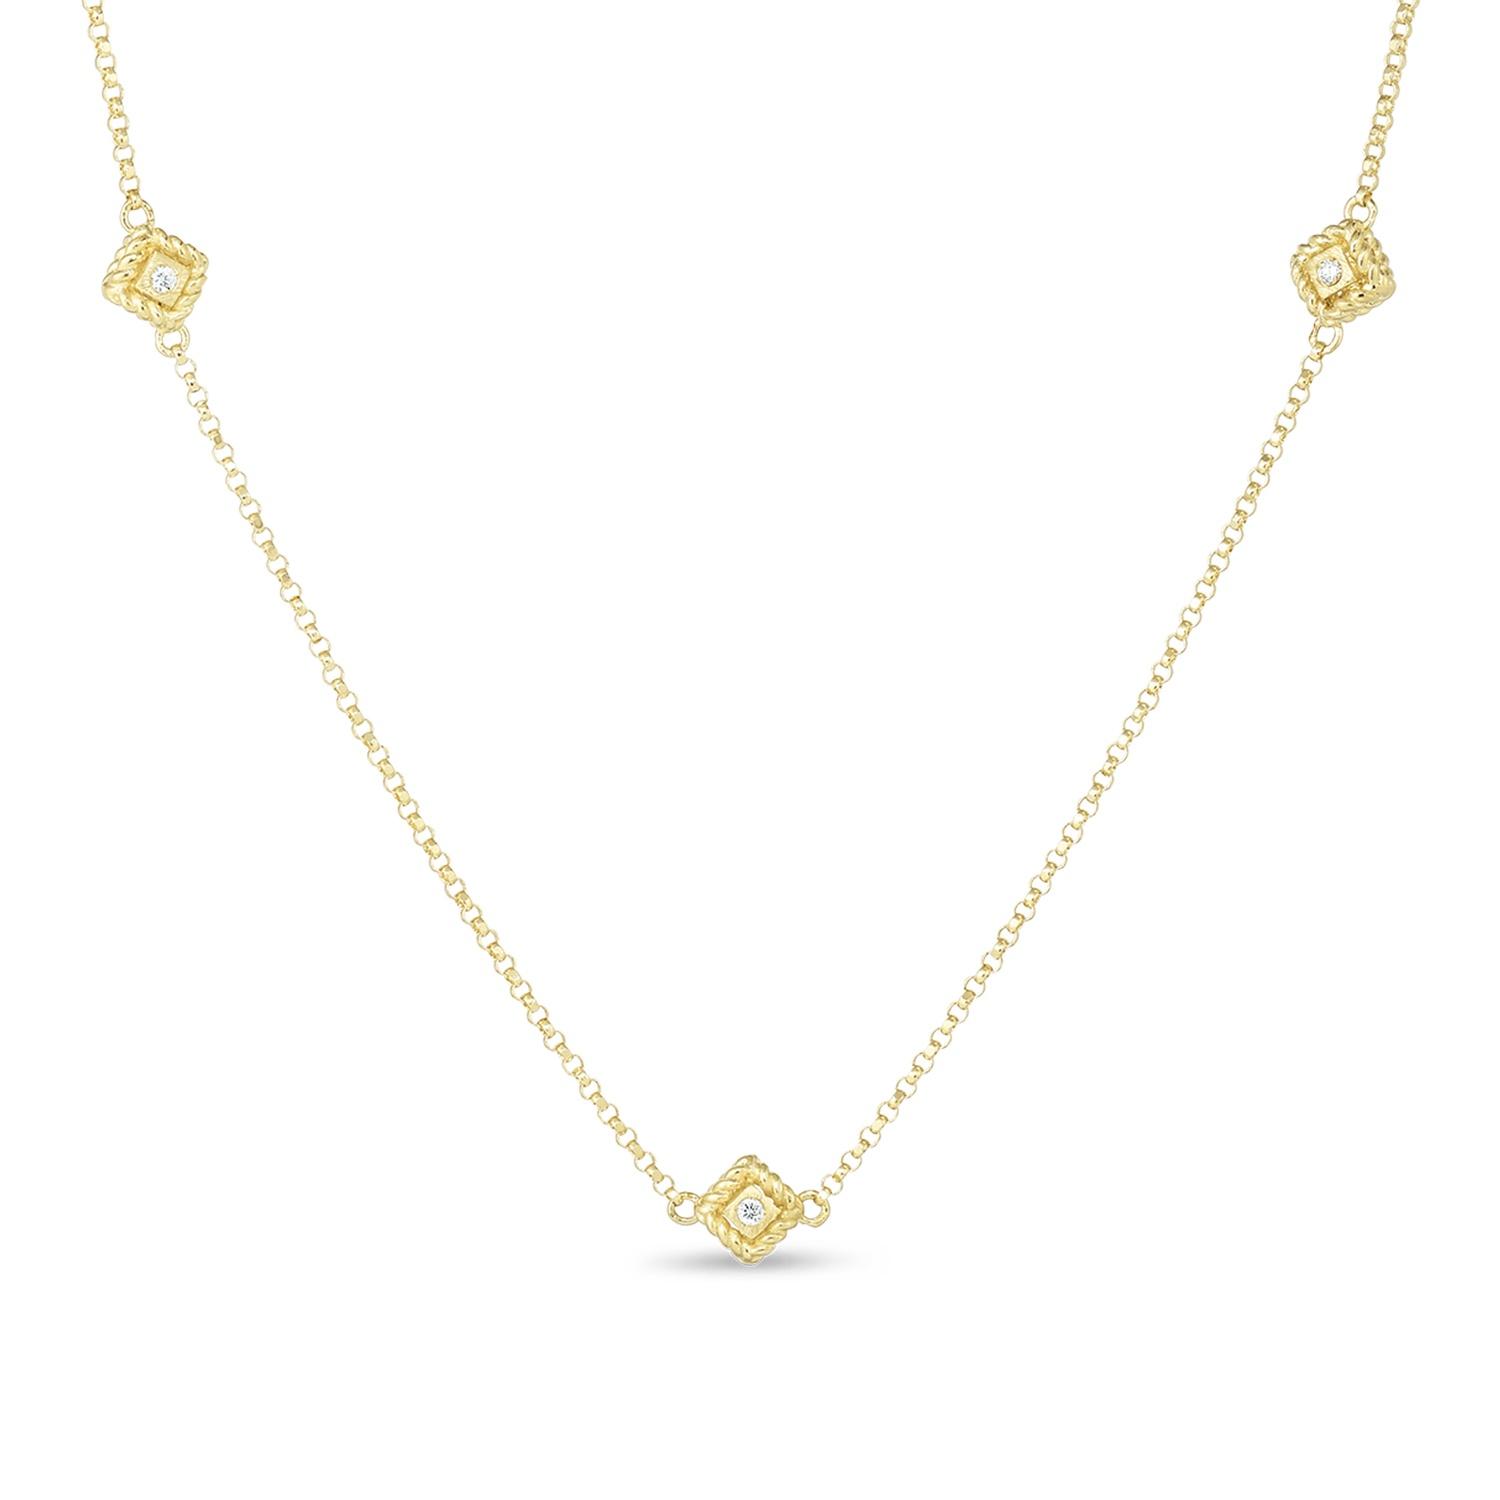 Roberto Coin 18k Yellow Gold Palazzo Ducale Diamond Station Necklace, 17.5"